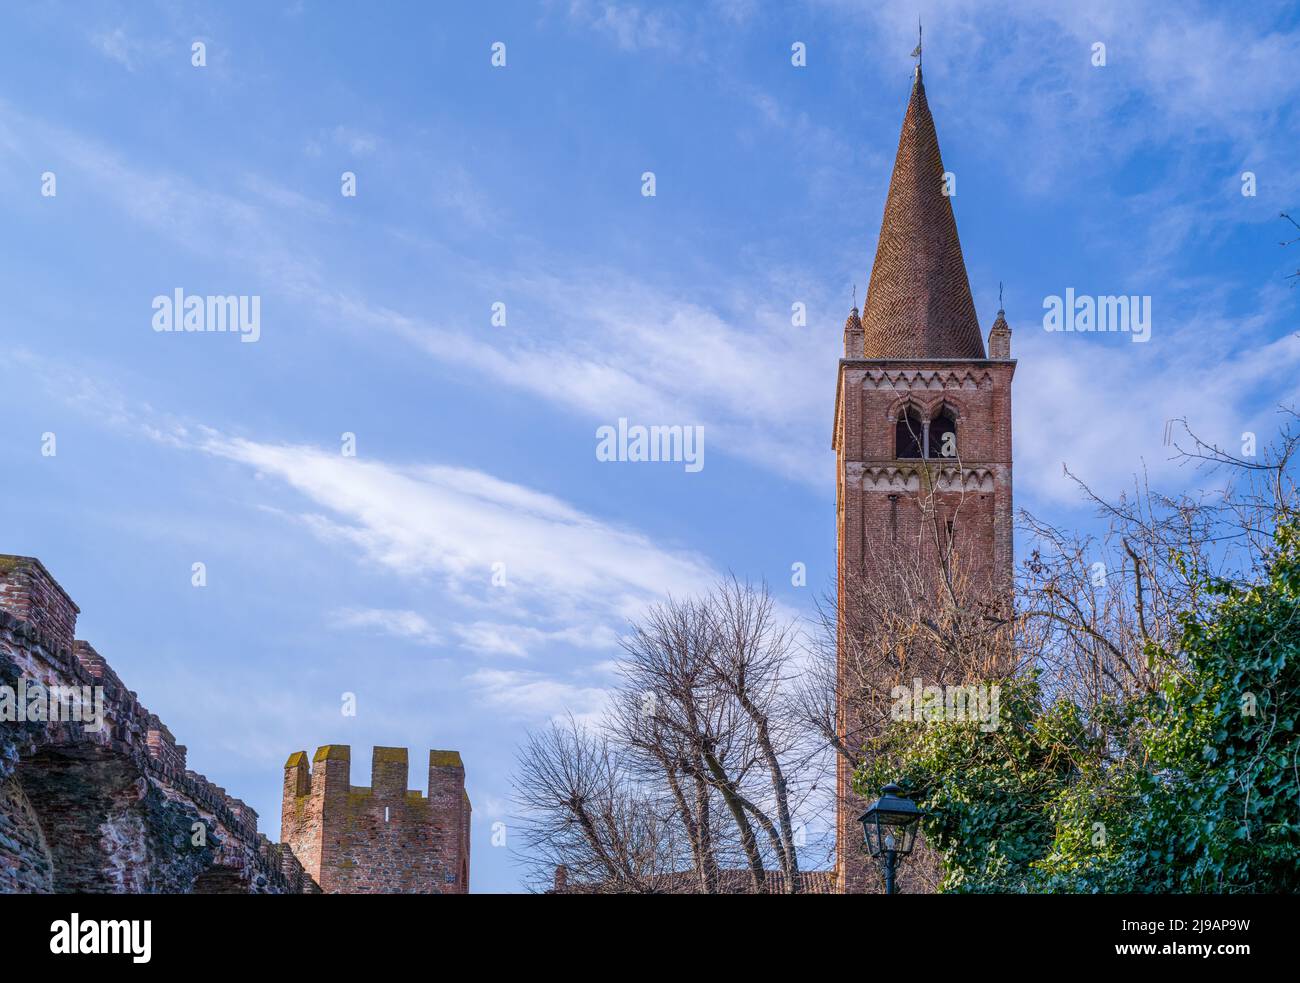 Italy, Montagnana, the church bell tower of San Francesco located in front of the medieval walls Stock Photo